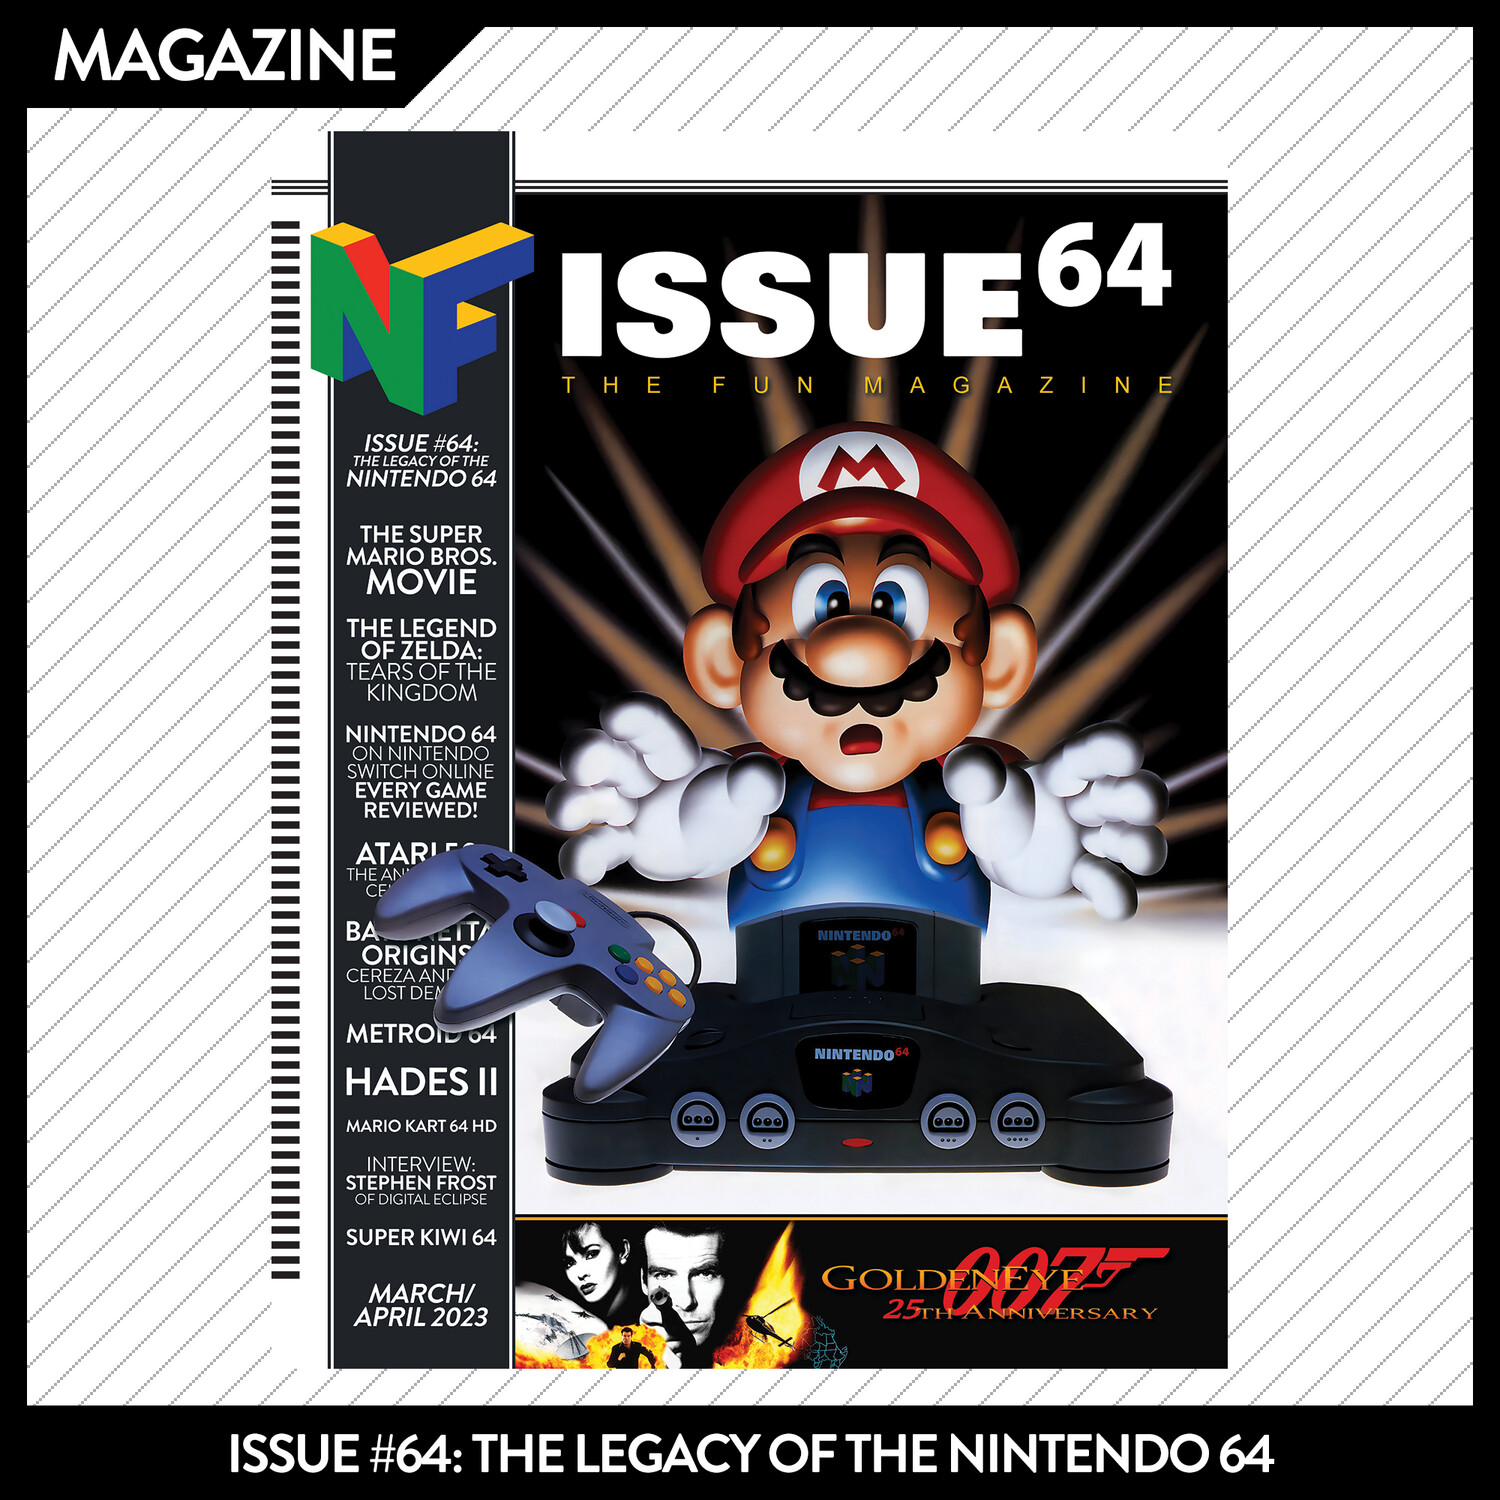 Issue #64: The Legacy of the Nintendo 64 – March/April 2023